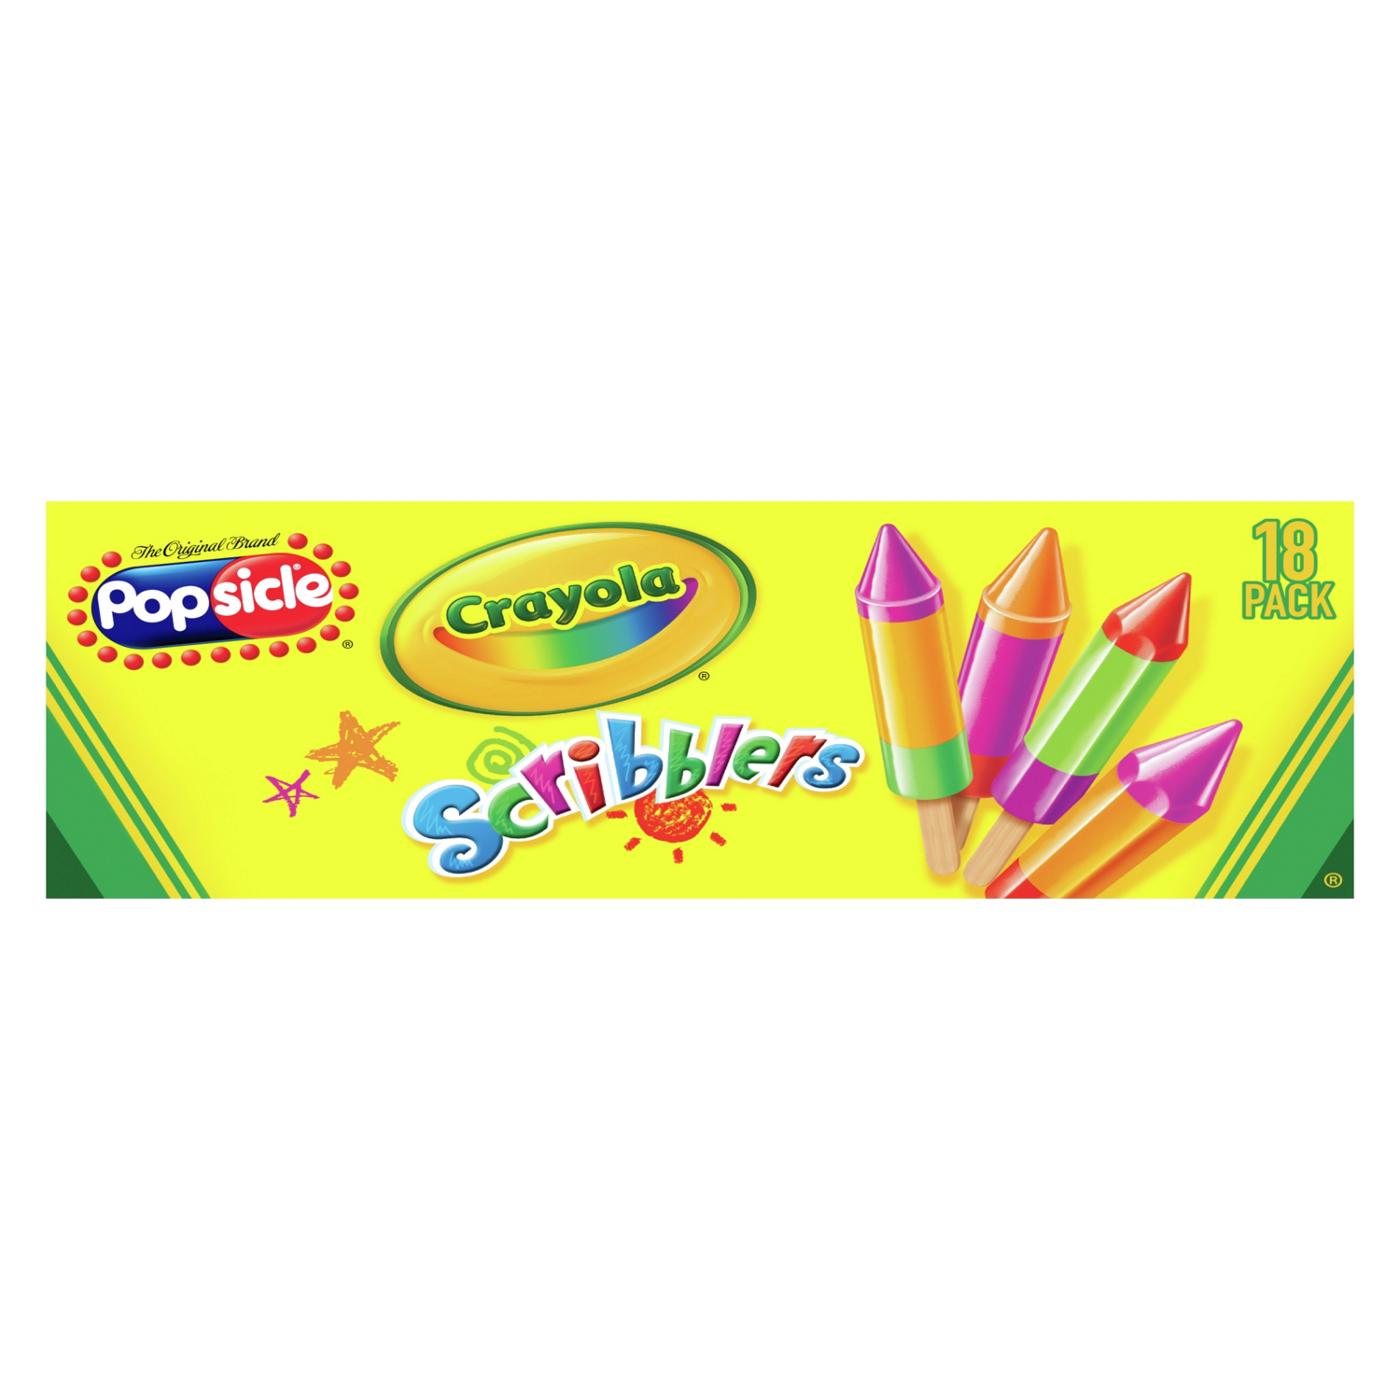 Popsicle Scribblers Ice Pops; image 2 of 6